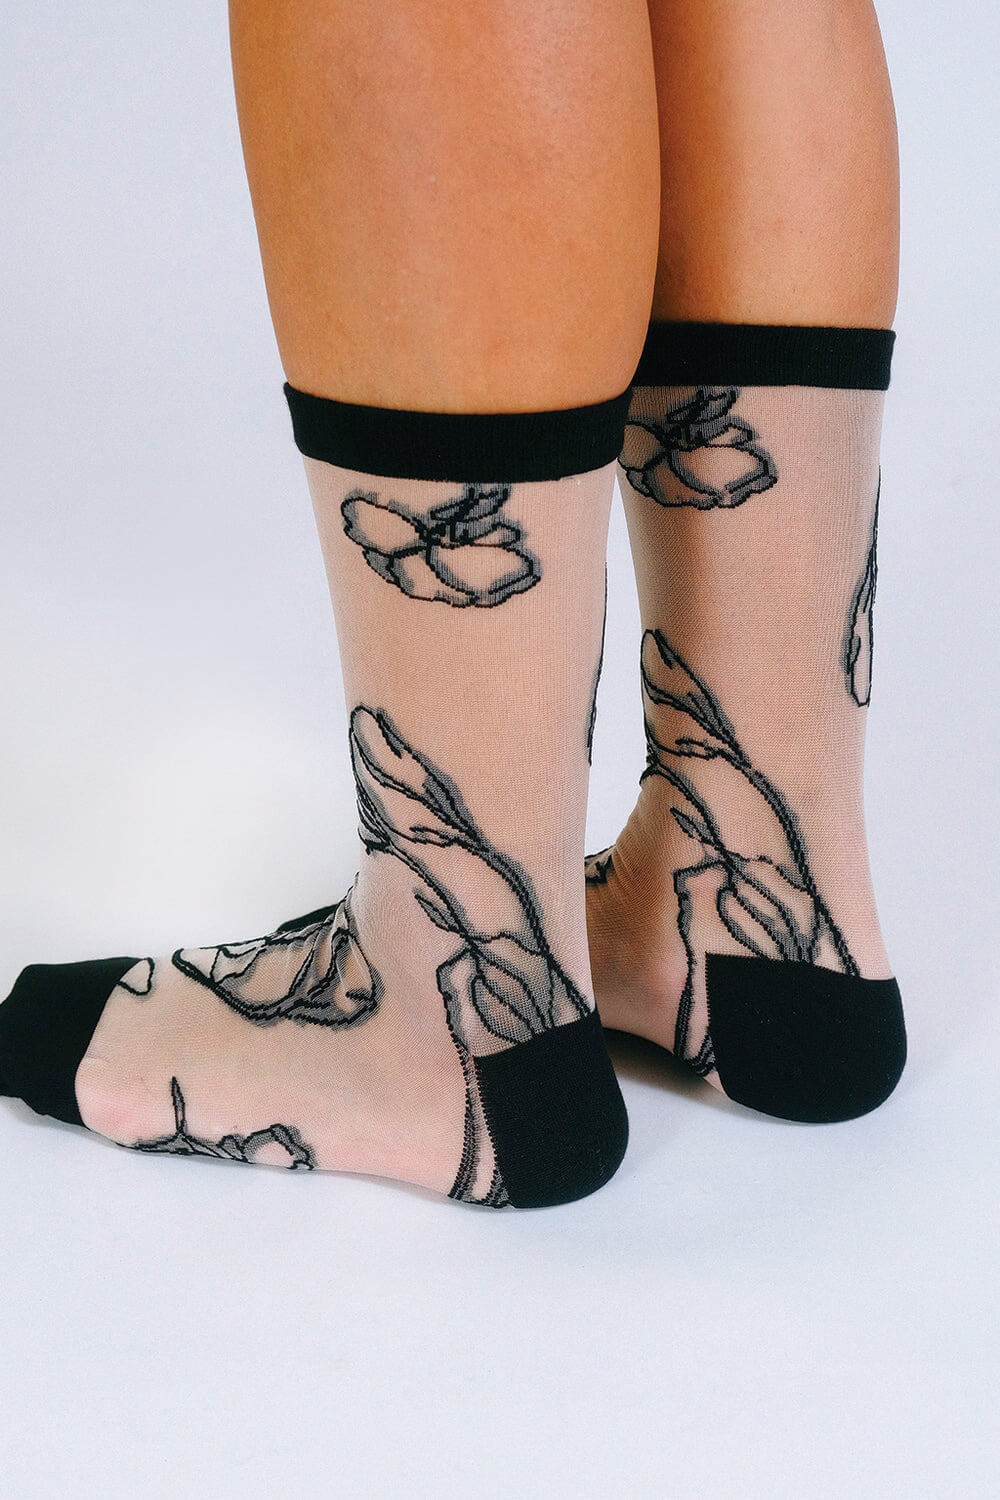 sheer socks by tailored union